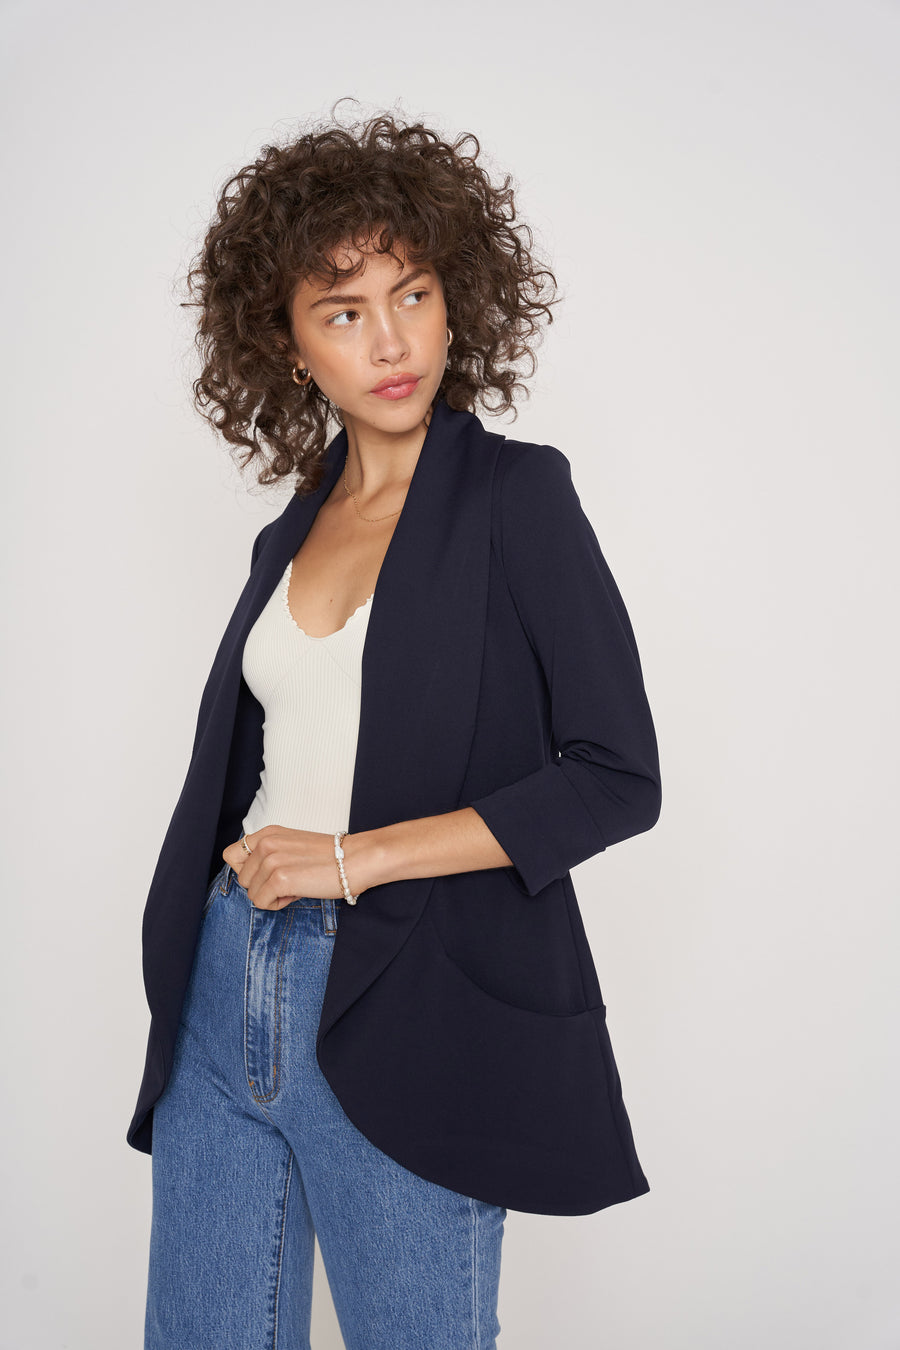 No Srcipt image - Images of 3 of 5 Classic Melanie Shawl Midnight Navy Color Staple Workwear Blazer